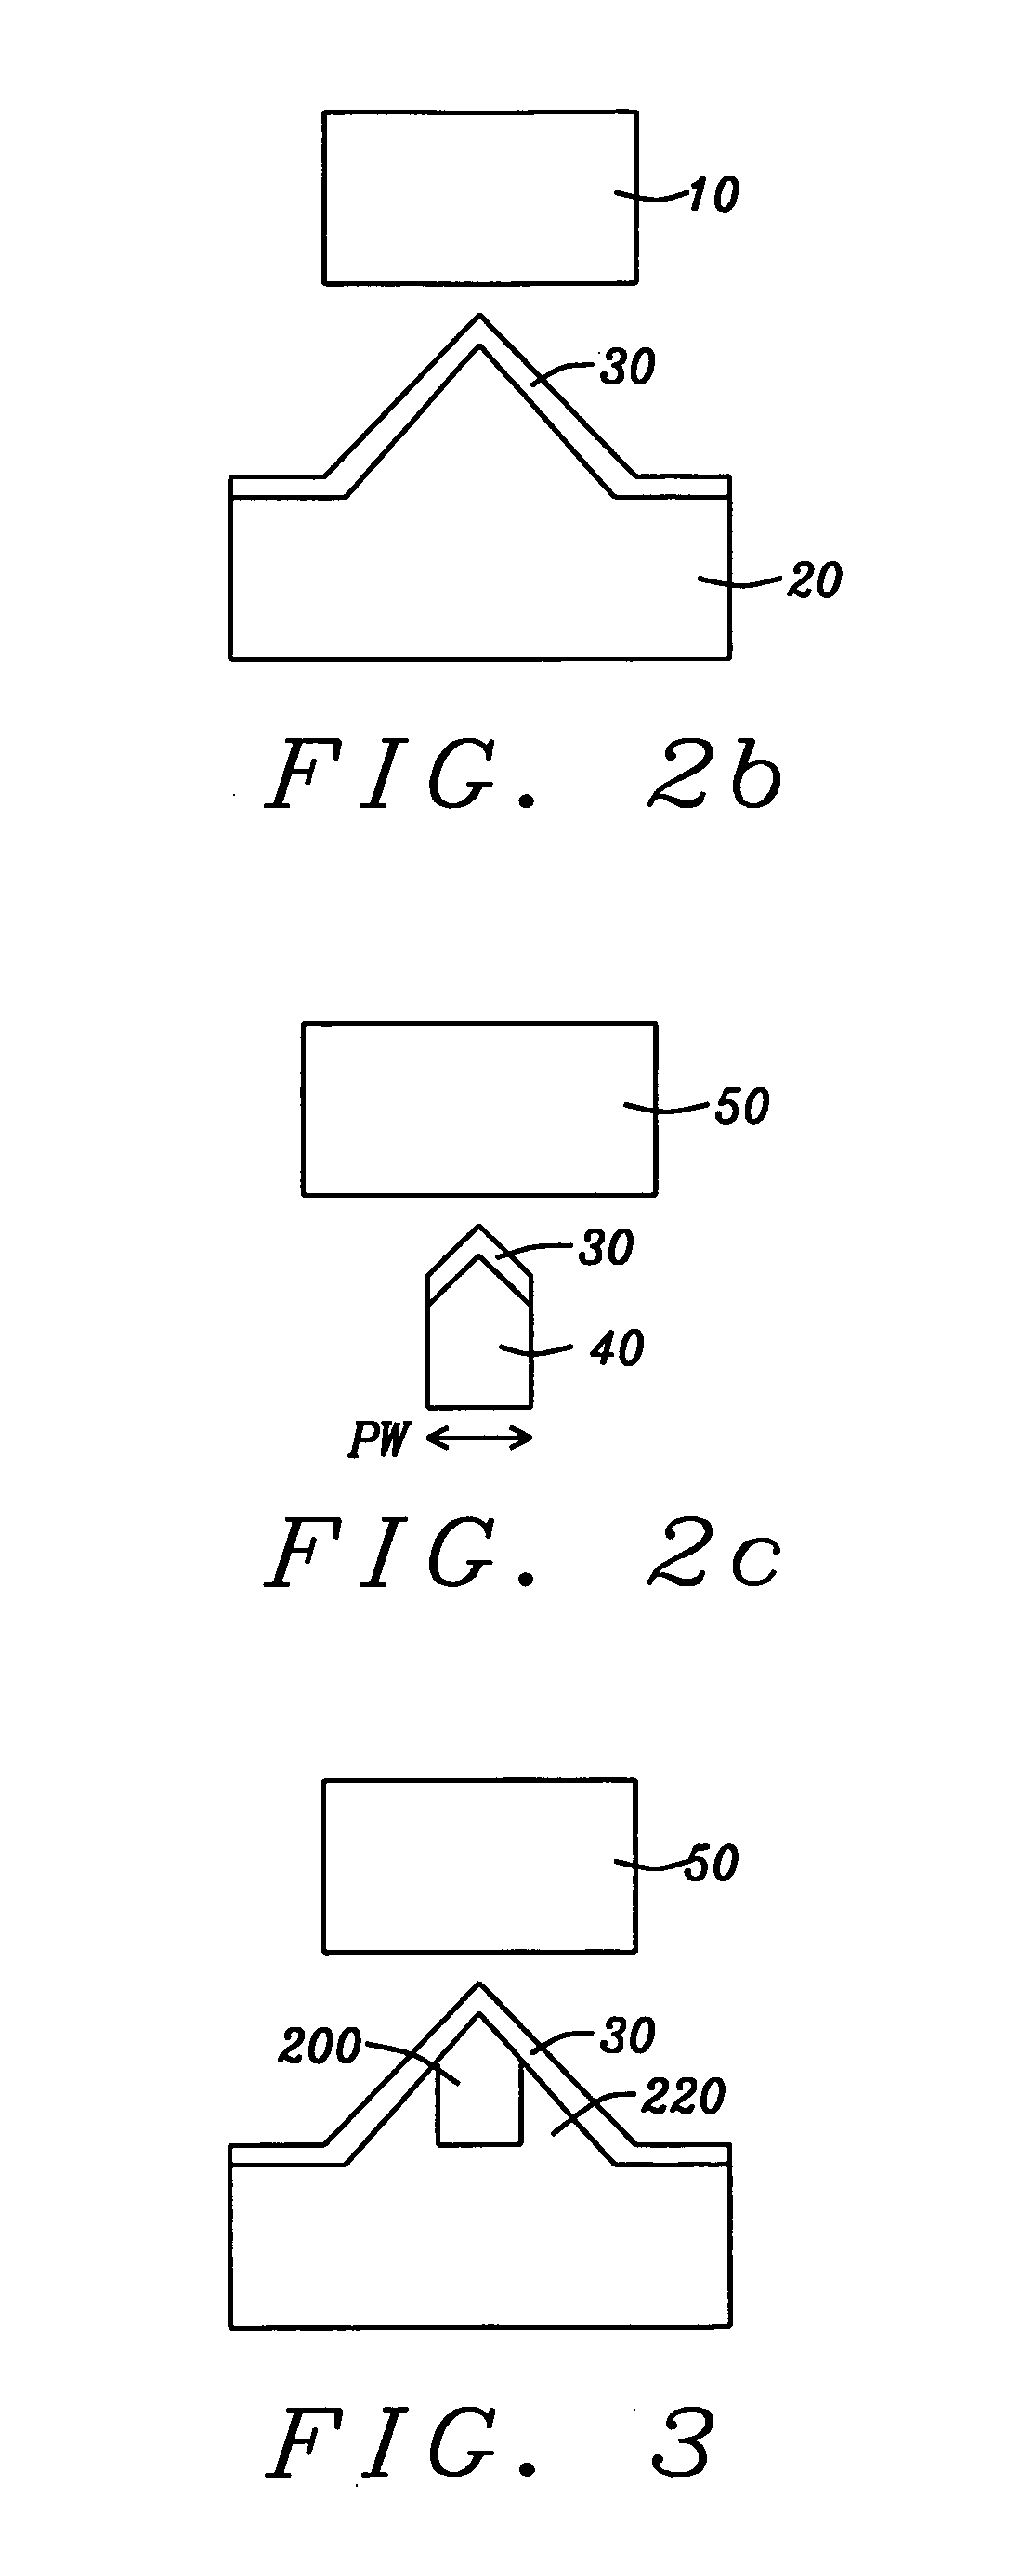 Heat assisted narrow pole design with trailing shield